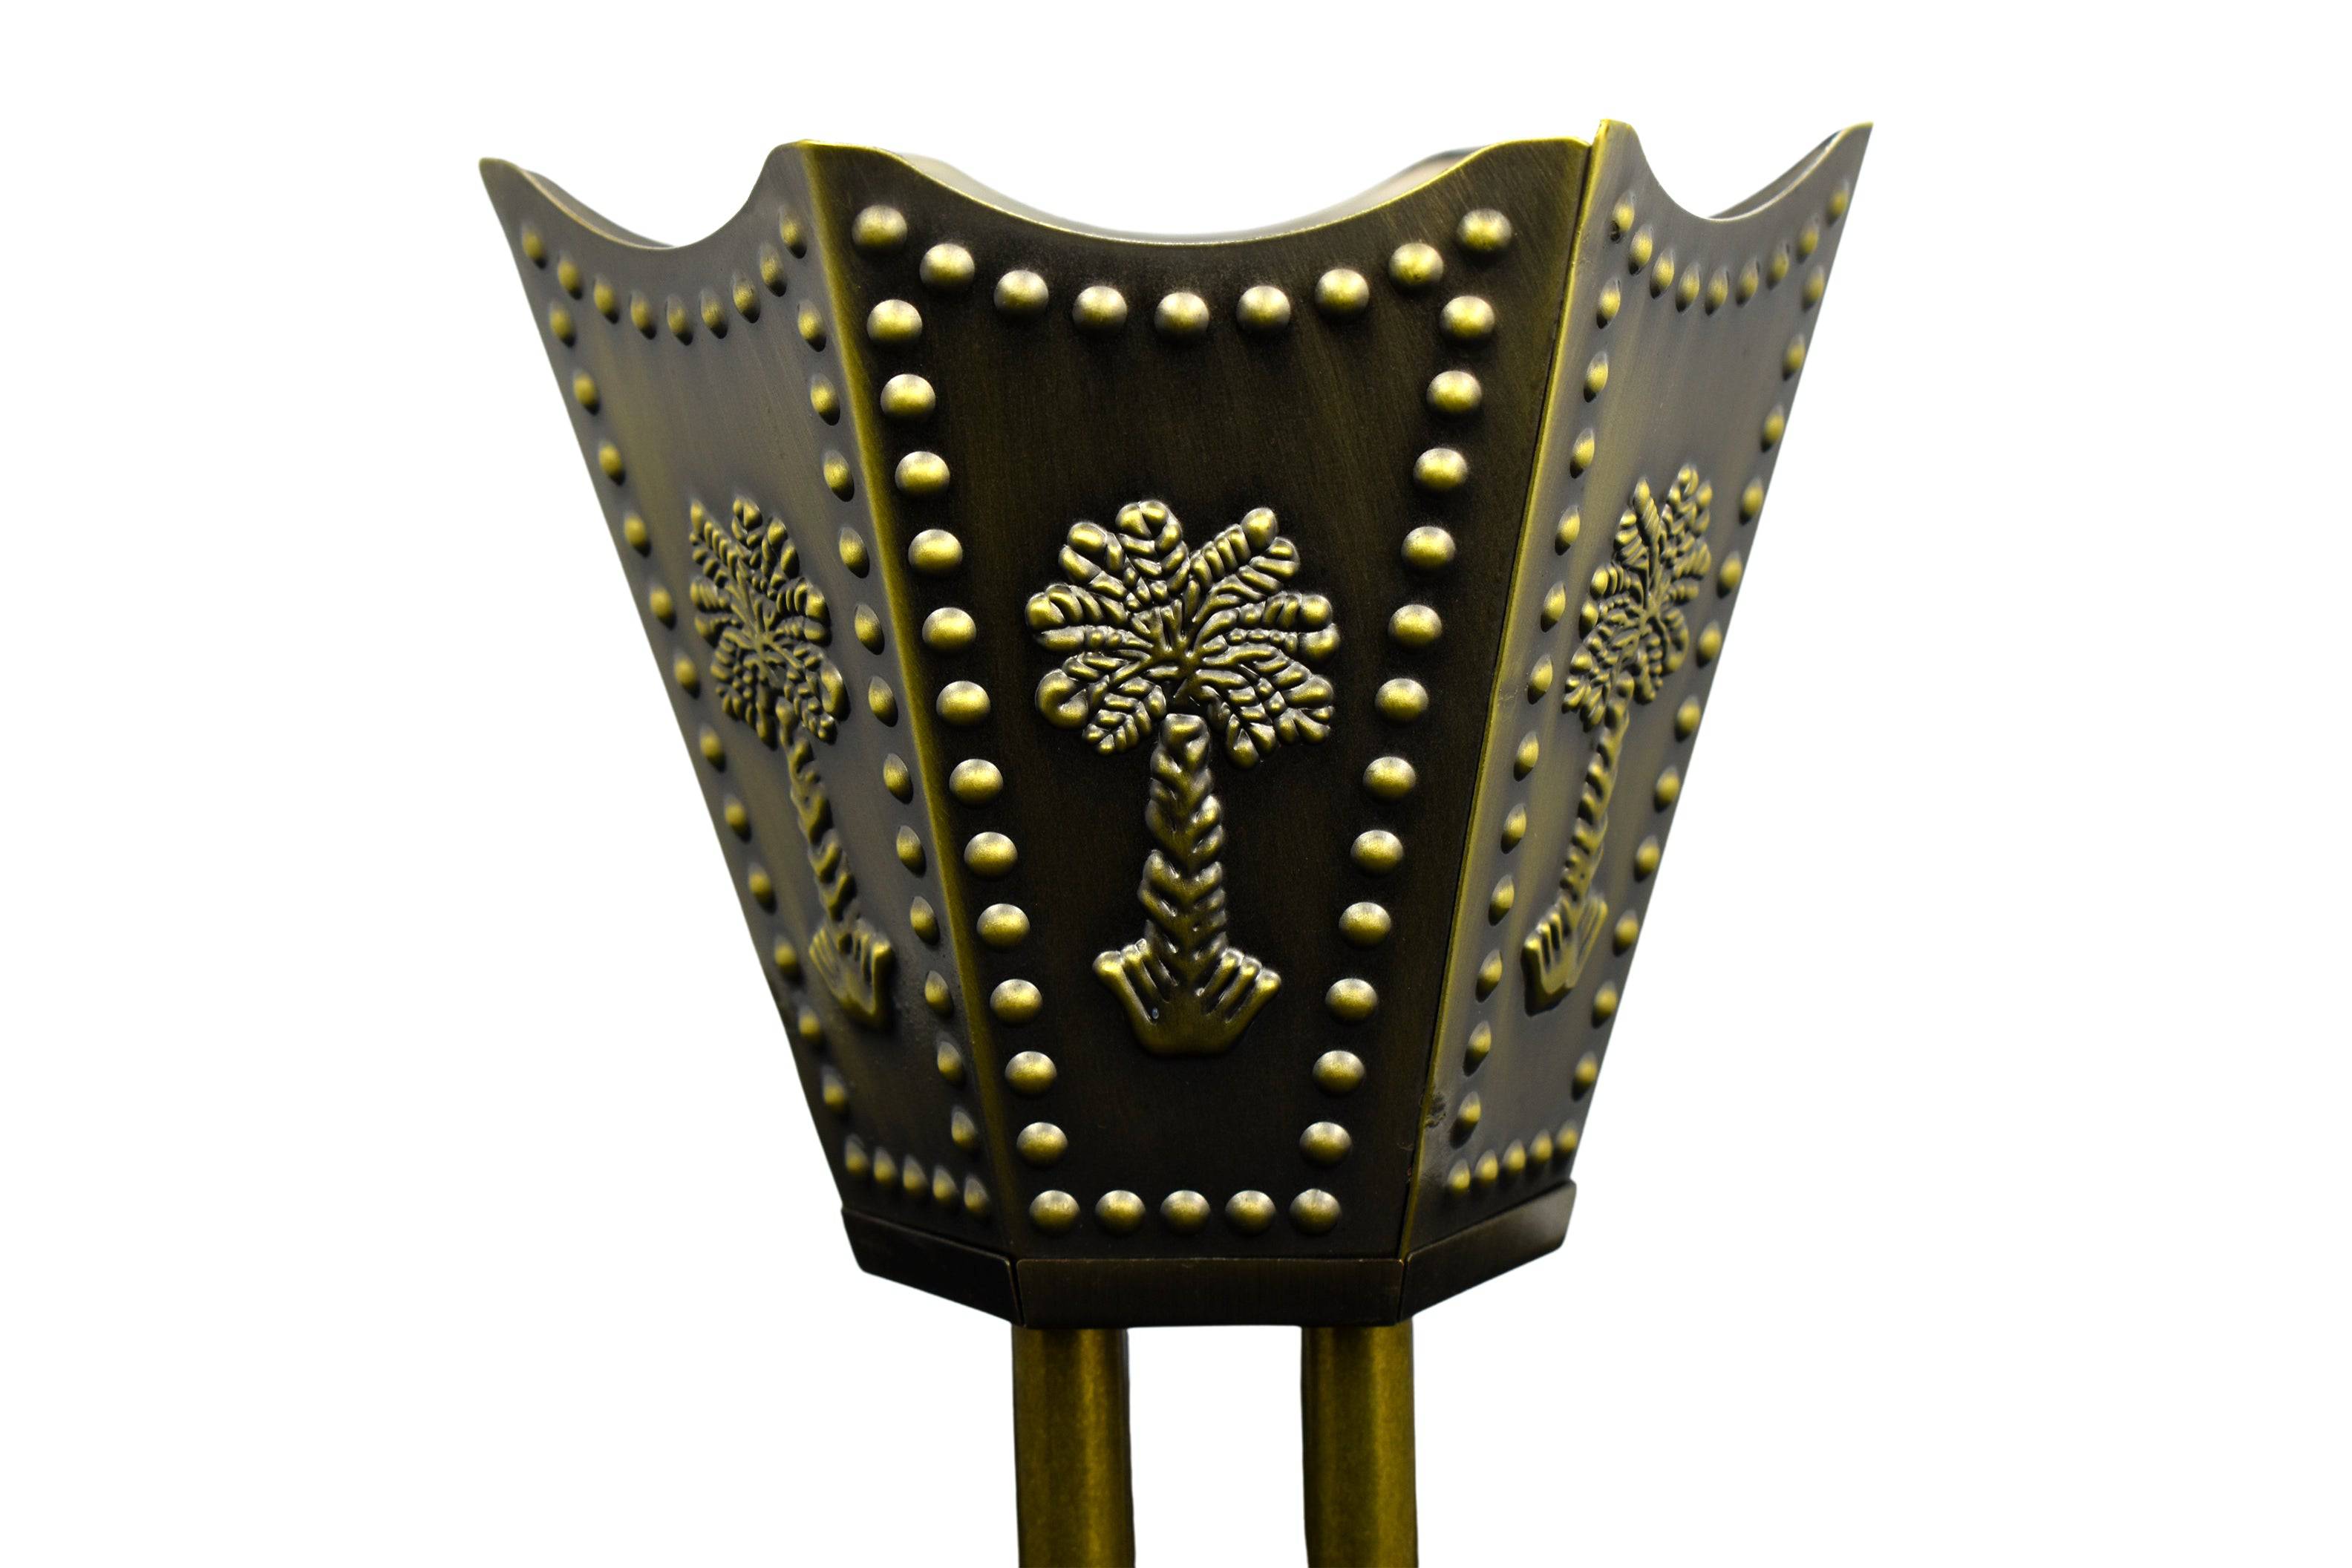 Metalic Studded Hexagon Shaped Electric Incense Bakhoor Burner by Intense Oud - Intense oud